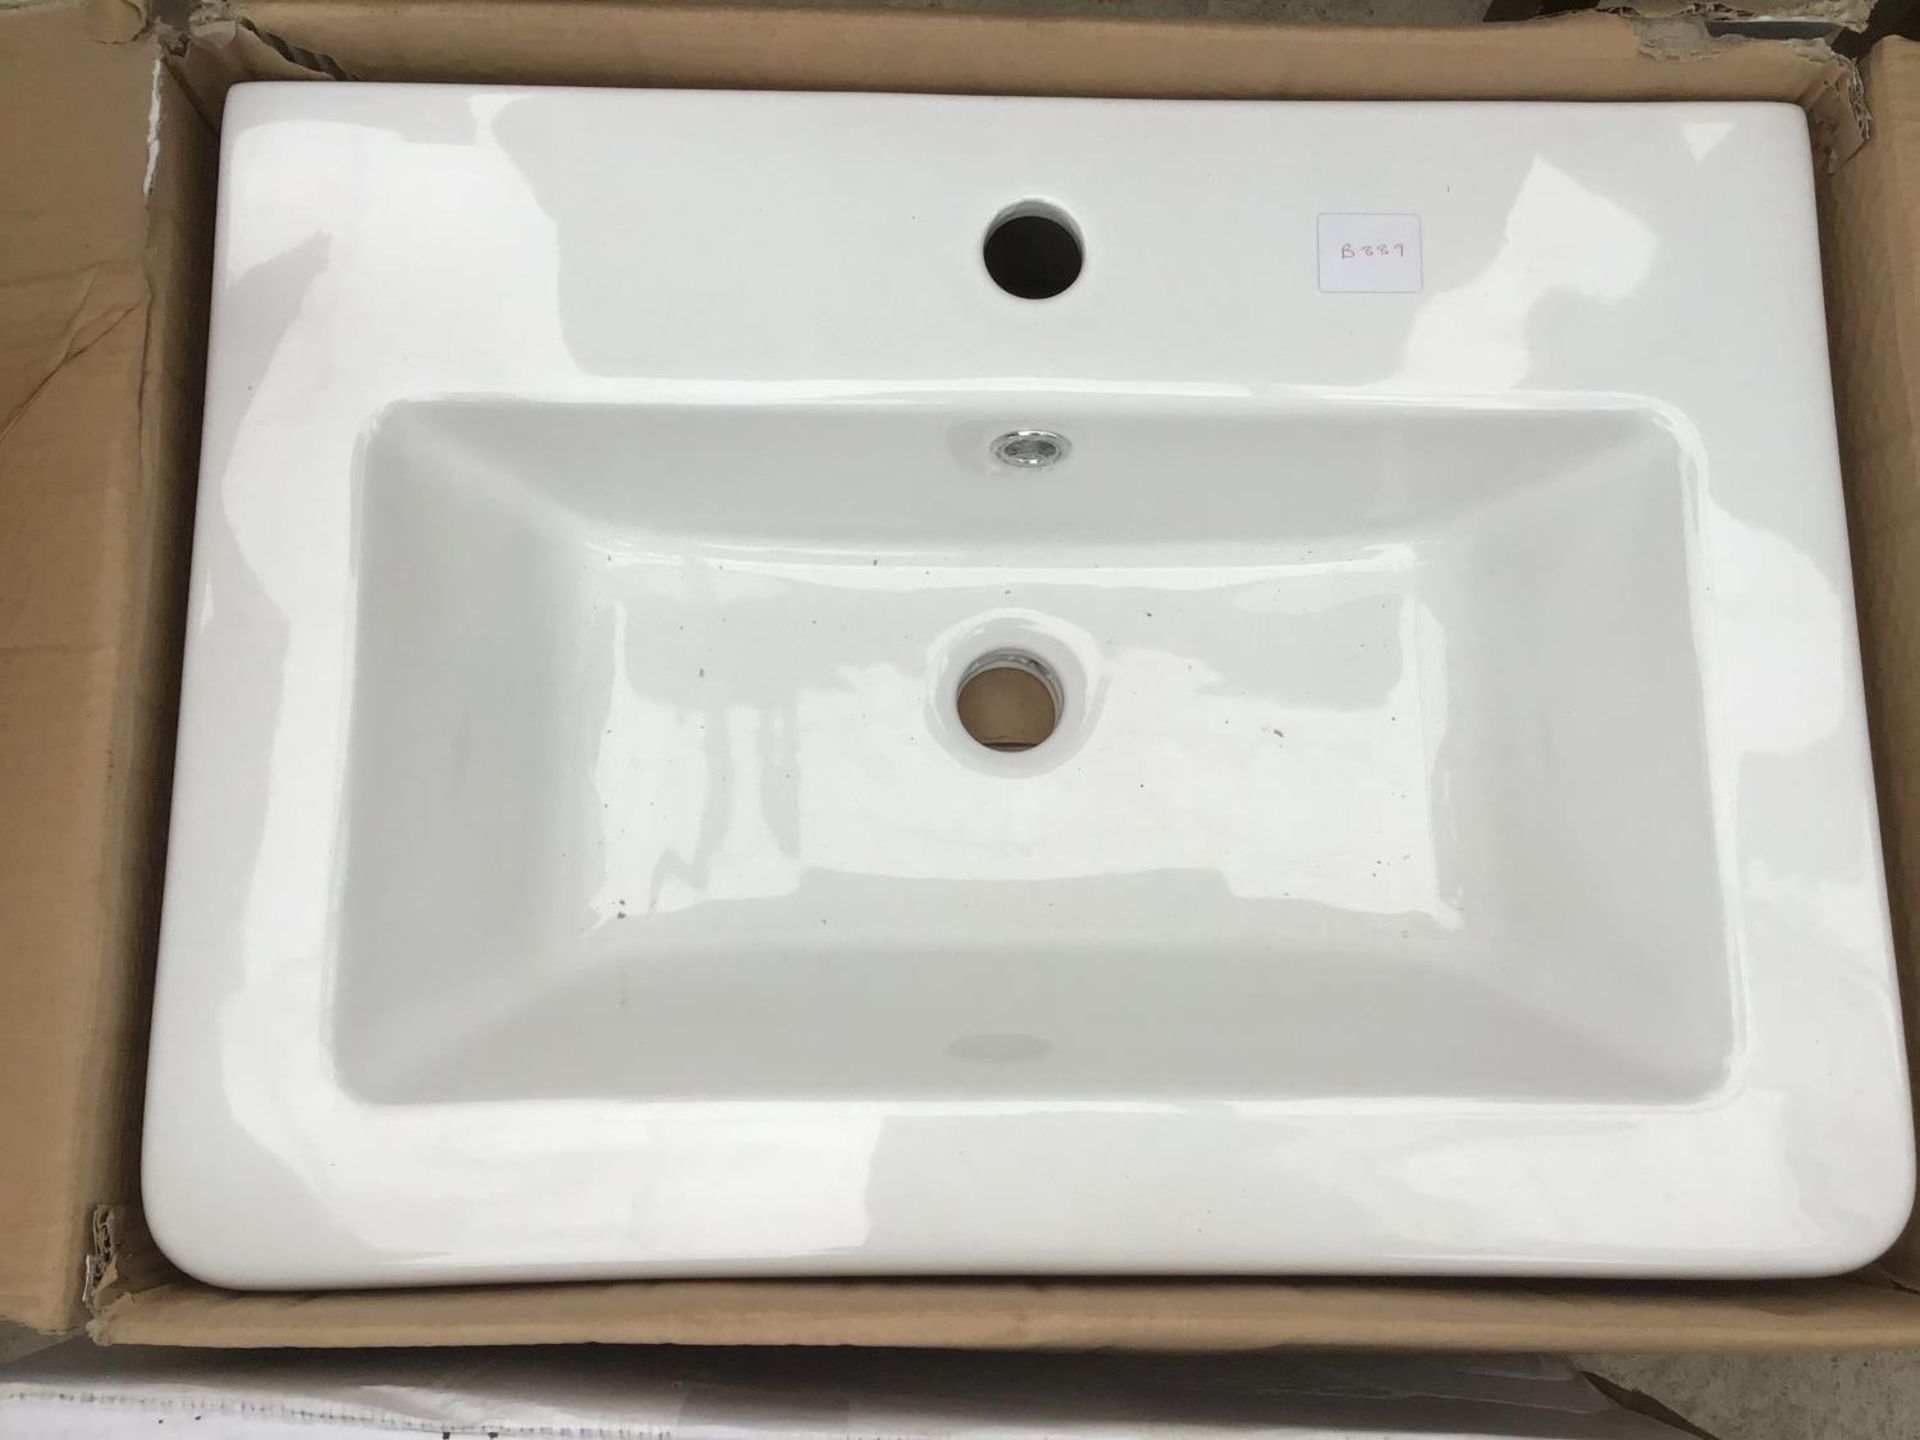 AN AS NEW AND BOXED VICTORIA PLUMB WHITE WASH BASIN 600 X 440 BAS1001